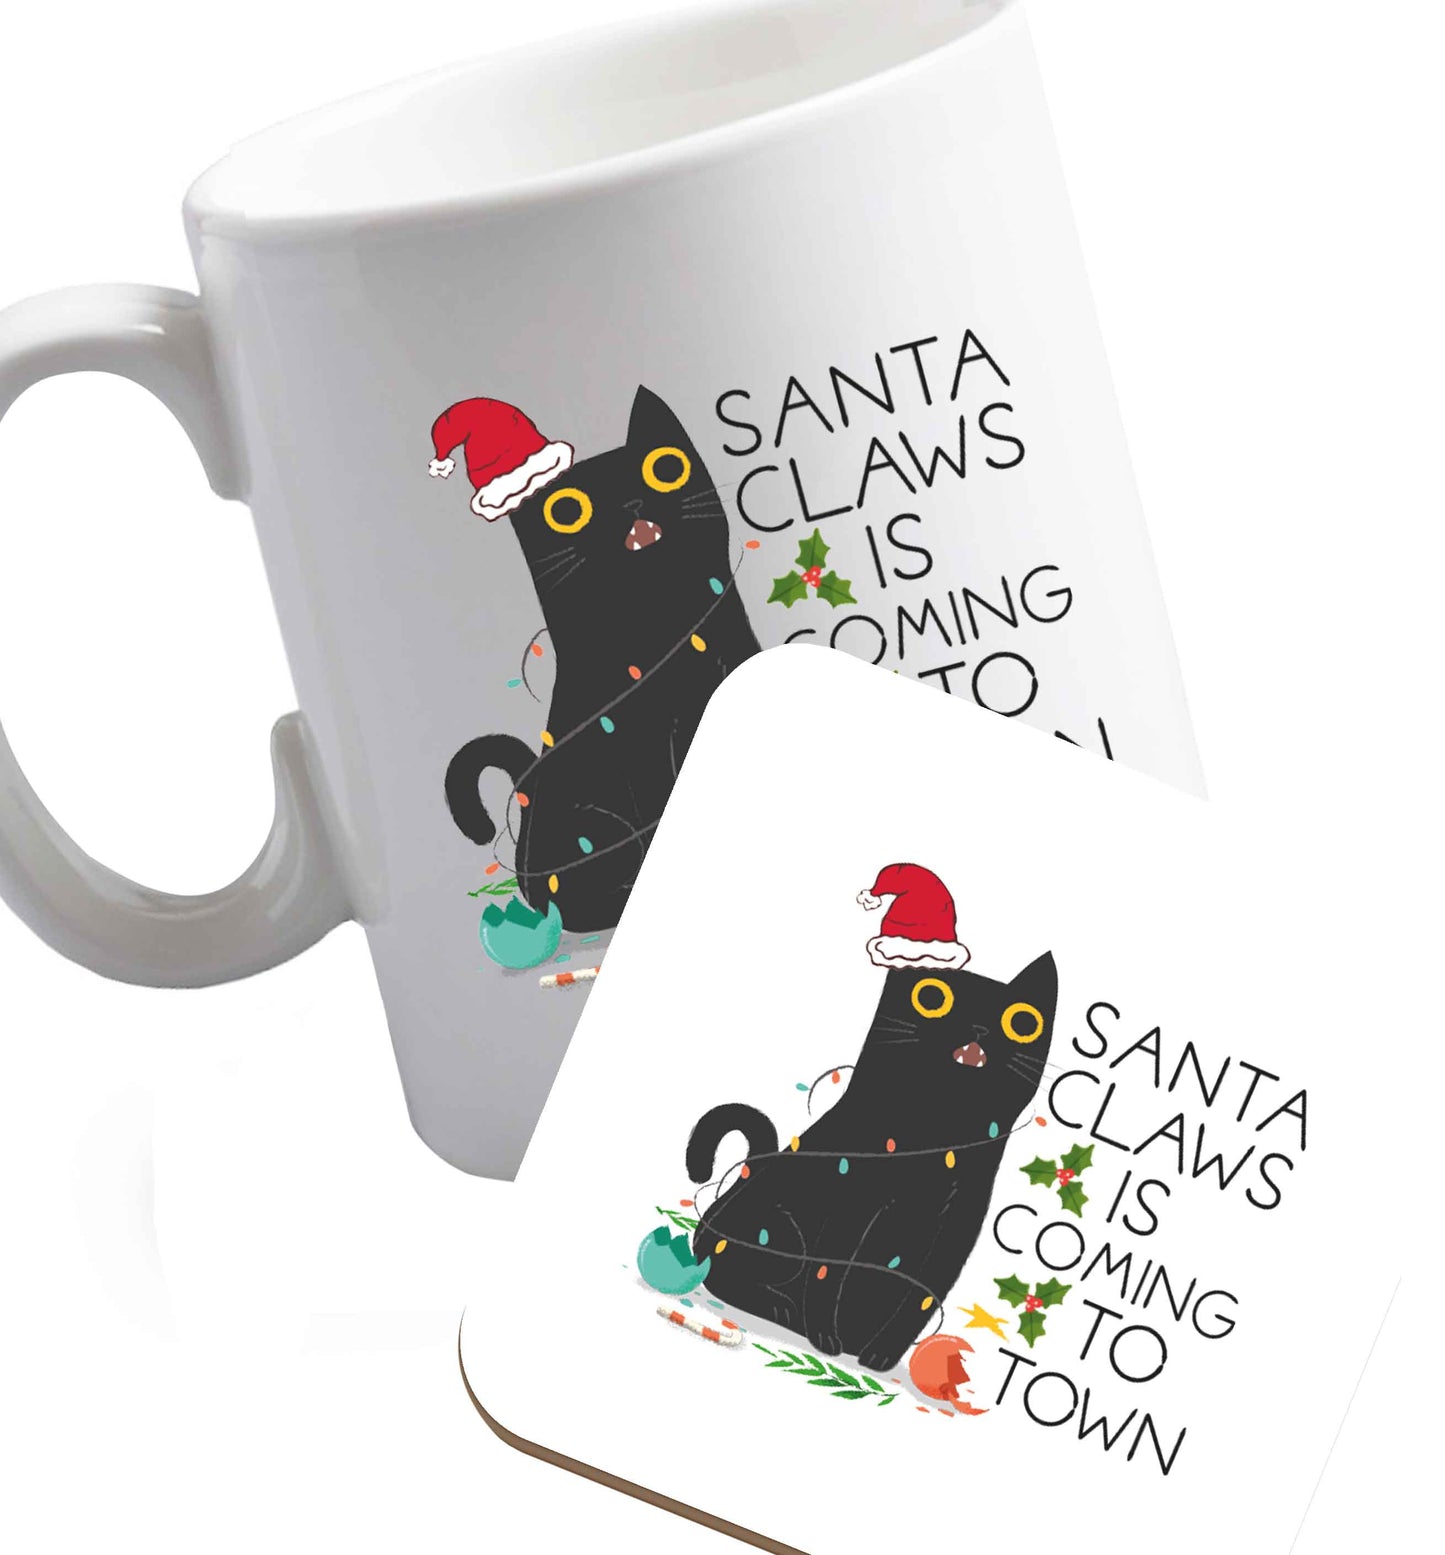 10 oz Santa claws is coming to town  ceramic mug and coaster set right handed